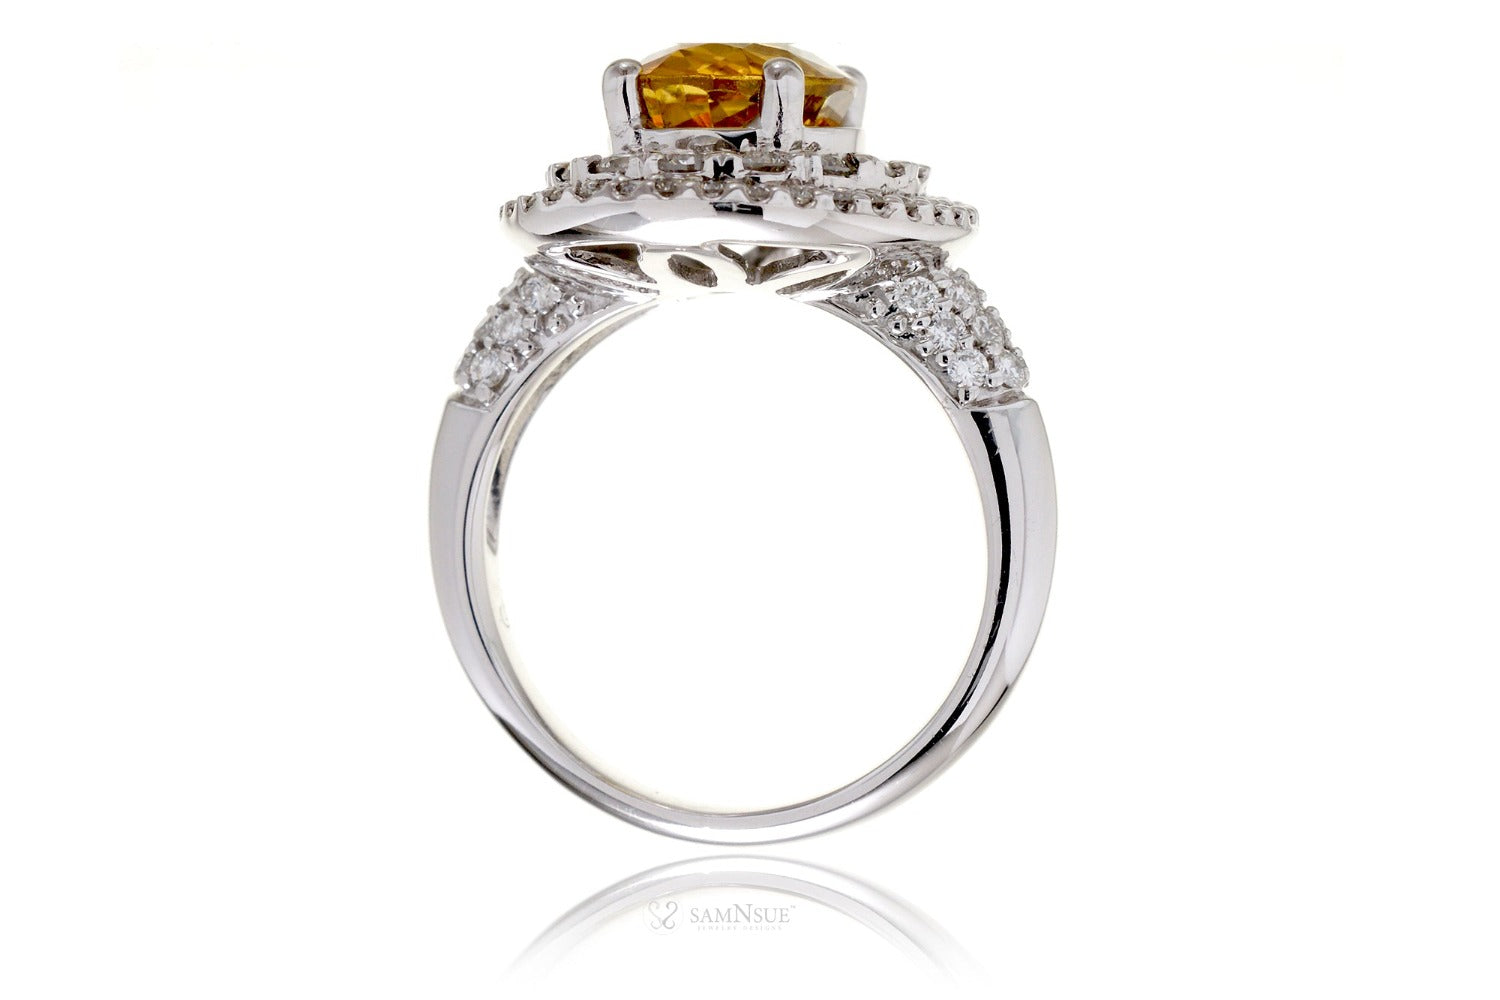 Oval yellow sapphire ring with a double diamond halo